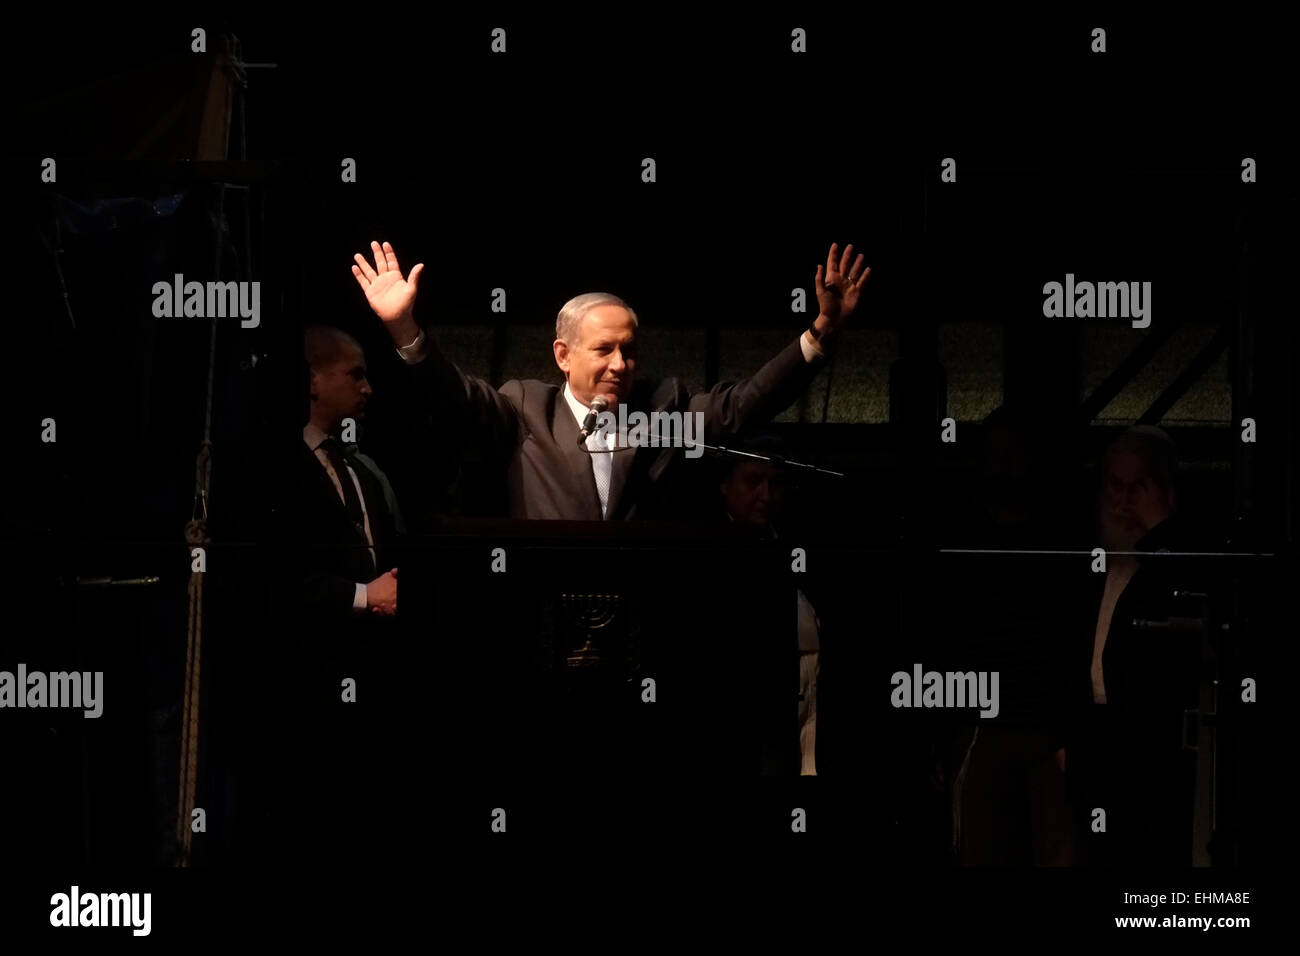 Tel Aviv, Israel. 15th March. Israeli Prime Minister Benjamin Netanyahu waves during his election rally in Tel Aviv, Israel, March 15, 2015. Over 40,000 gathered in Tel Aviv to support the right-wing ruling Likud Party headed by Israeli Prime Minister Benjamin Netanyahu two days before the country's general election as polls predict end of his reign. Credit:  Eddie Gerald/Alamy Live News Stock Photo